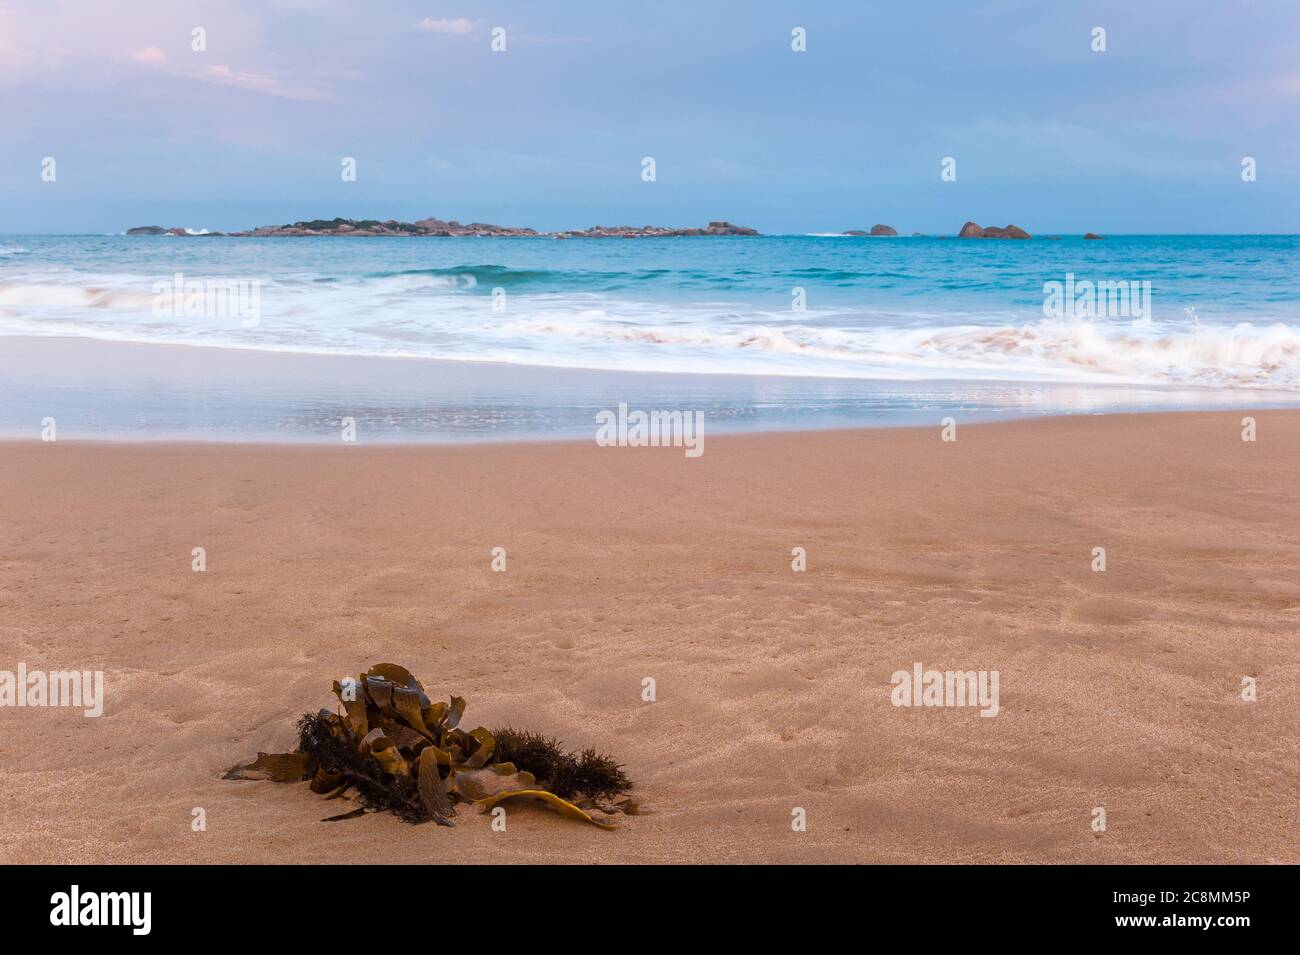 Fresh kelp lays stranded on a section of sandy beach, facing an off-shore rocky reef, on Horseshoe Bay in the Fleurieu Peninsula, South Australia. Stock Photo